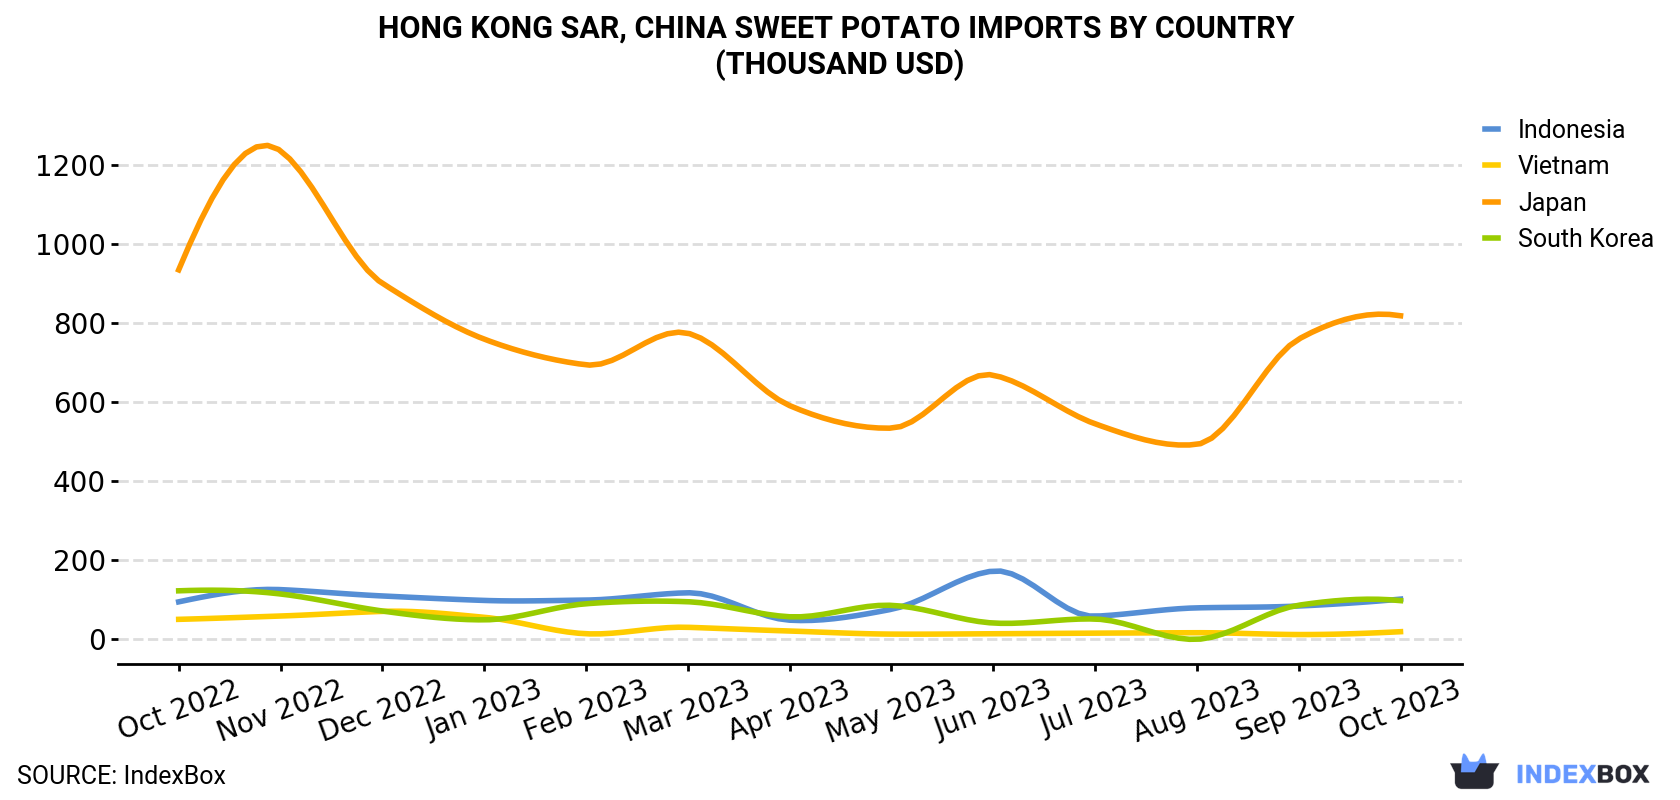 Hong Kong Sweet Potato Imports By Country (Thousand USD)